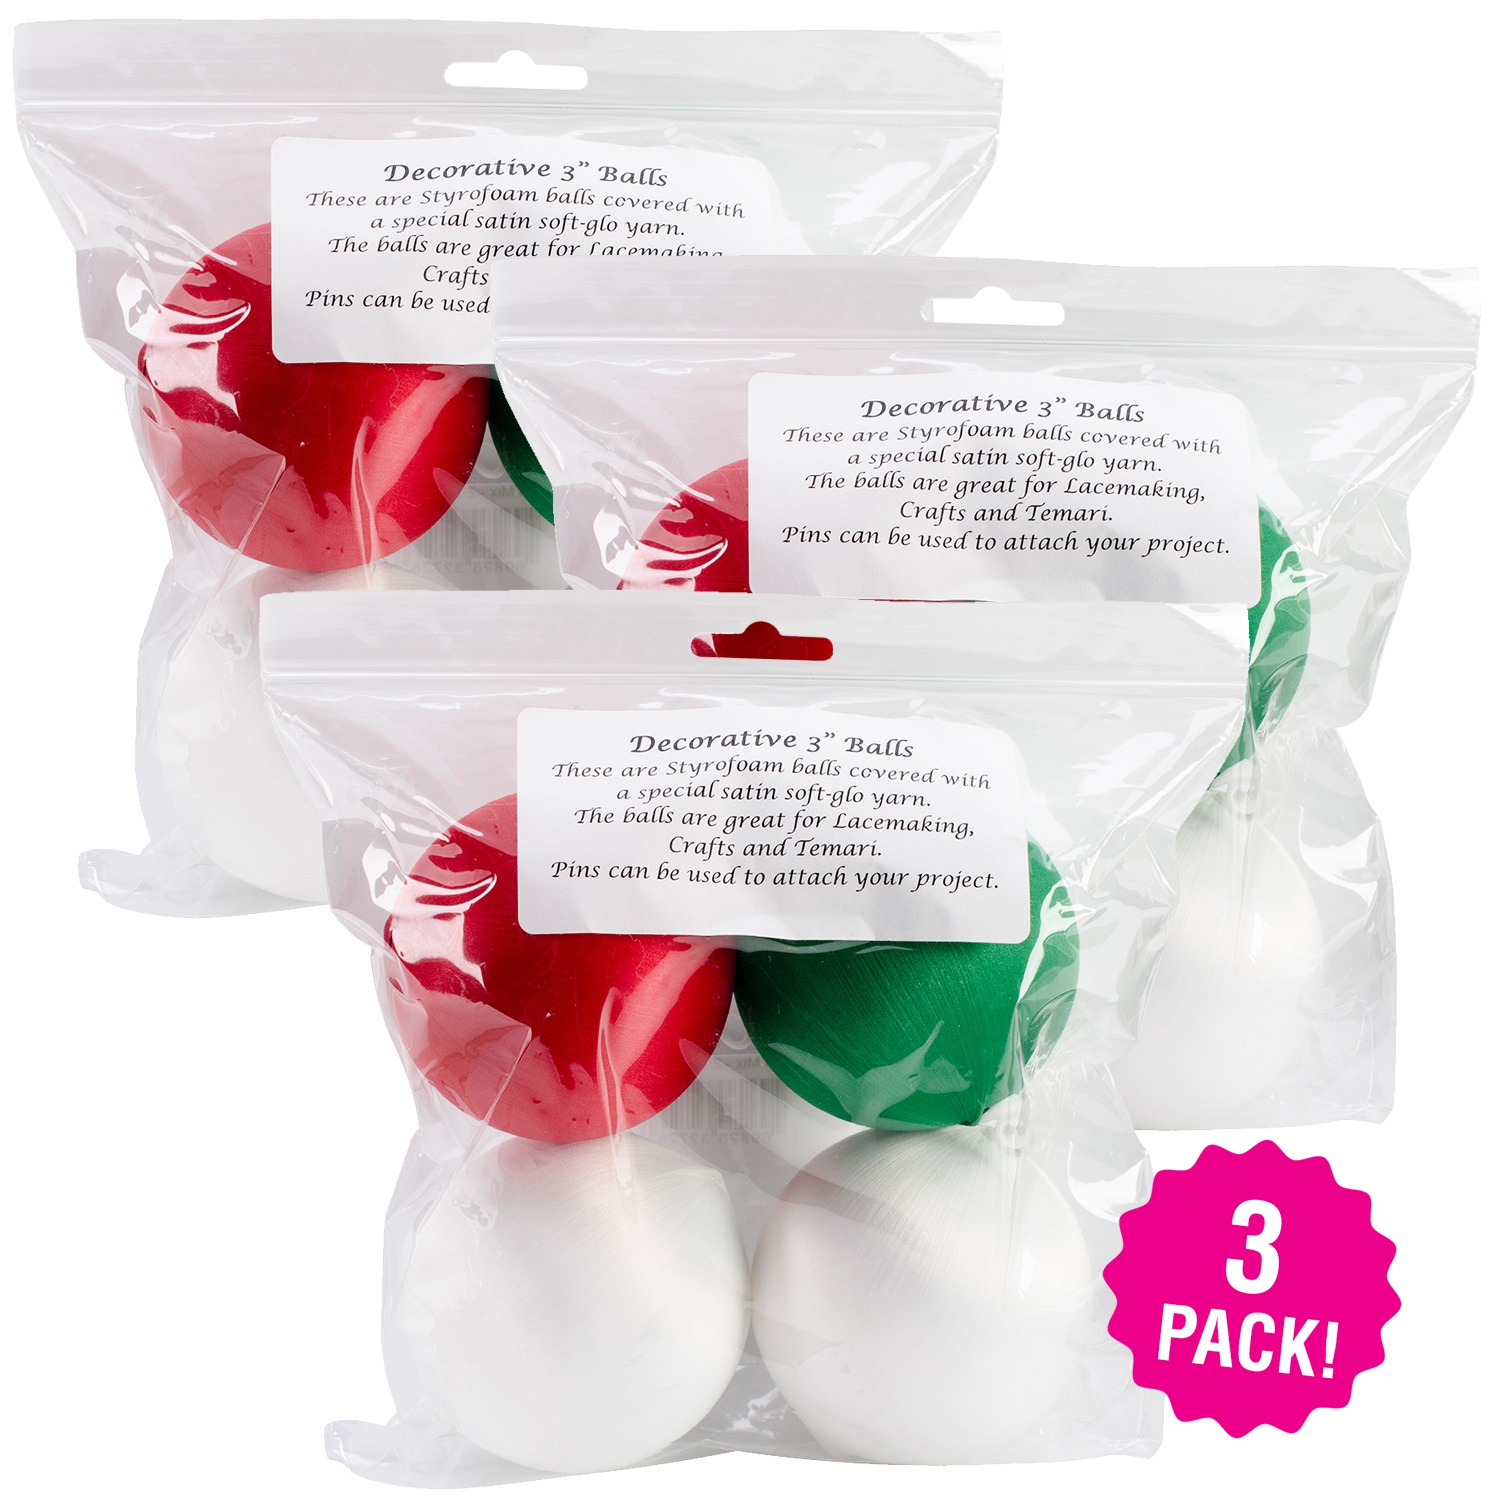 Handy Hands Decor Satin Covered Styrofoam Balls 3" 4 Count, Multipack of 3 - image 1 of 2